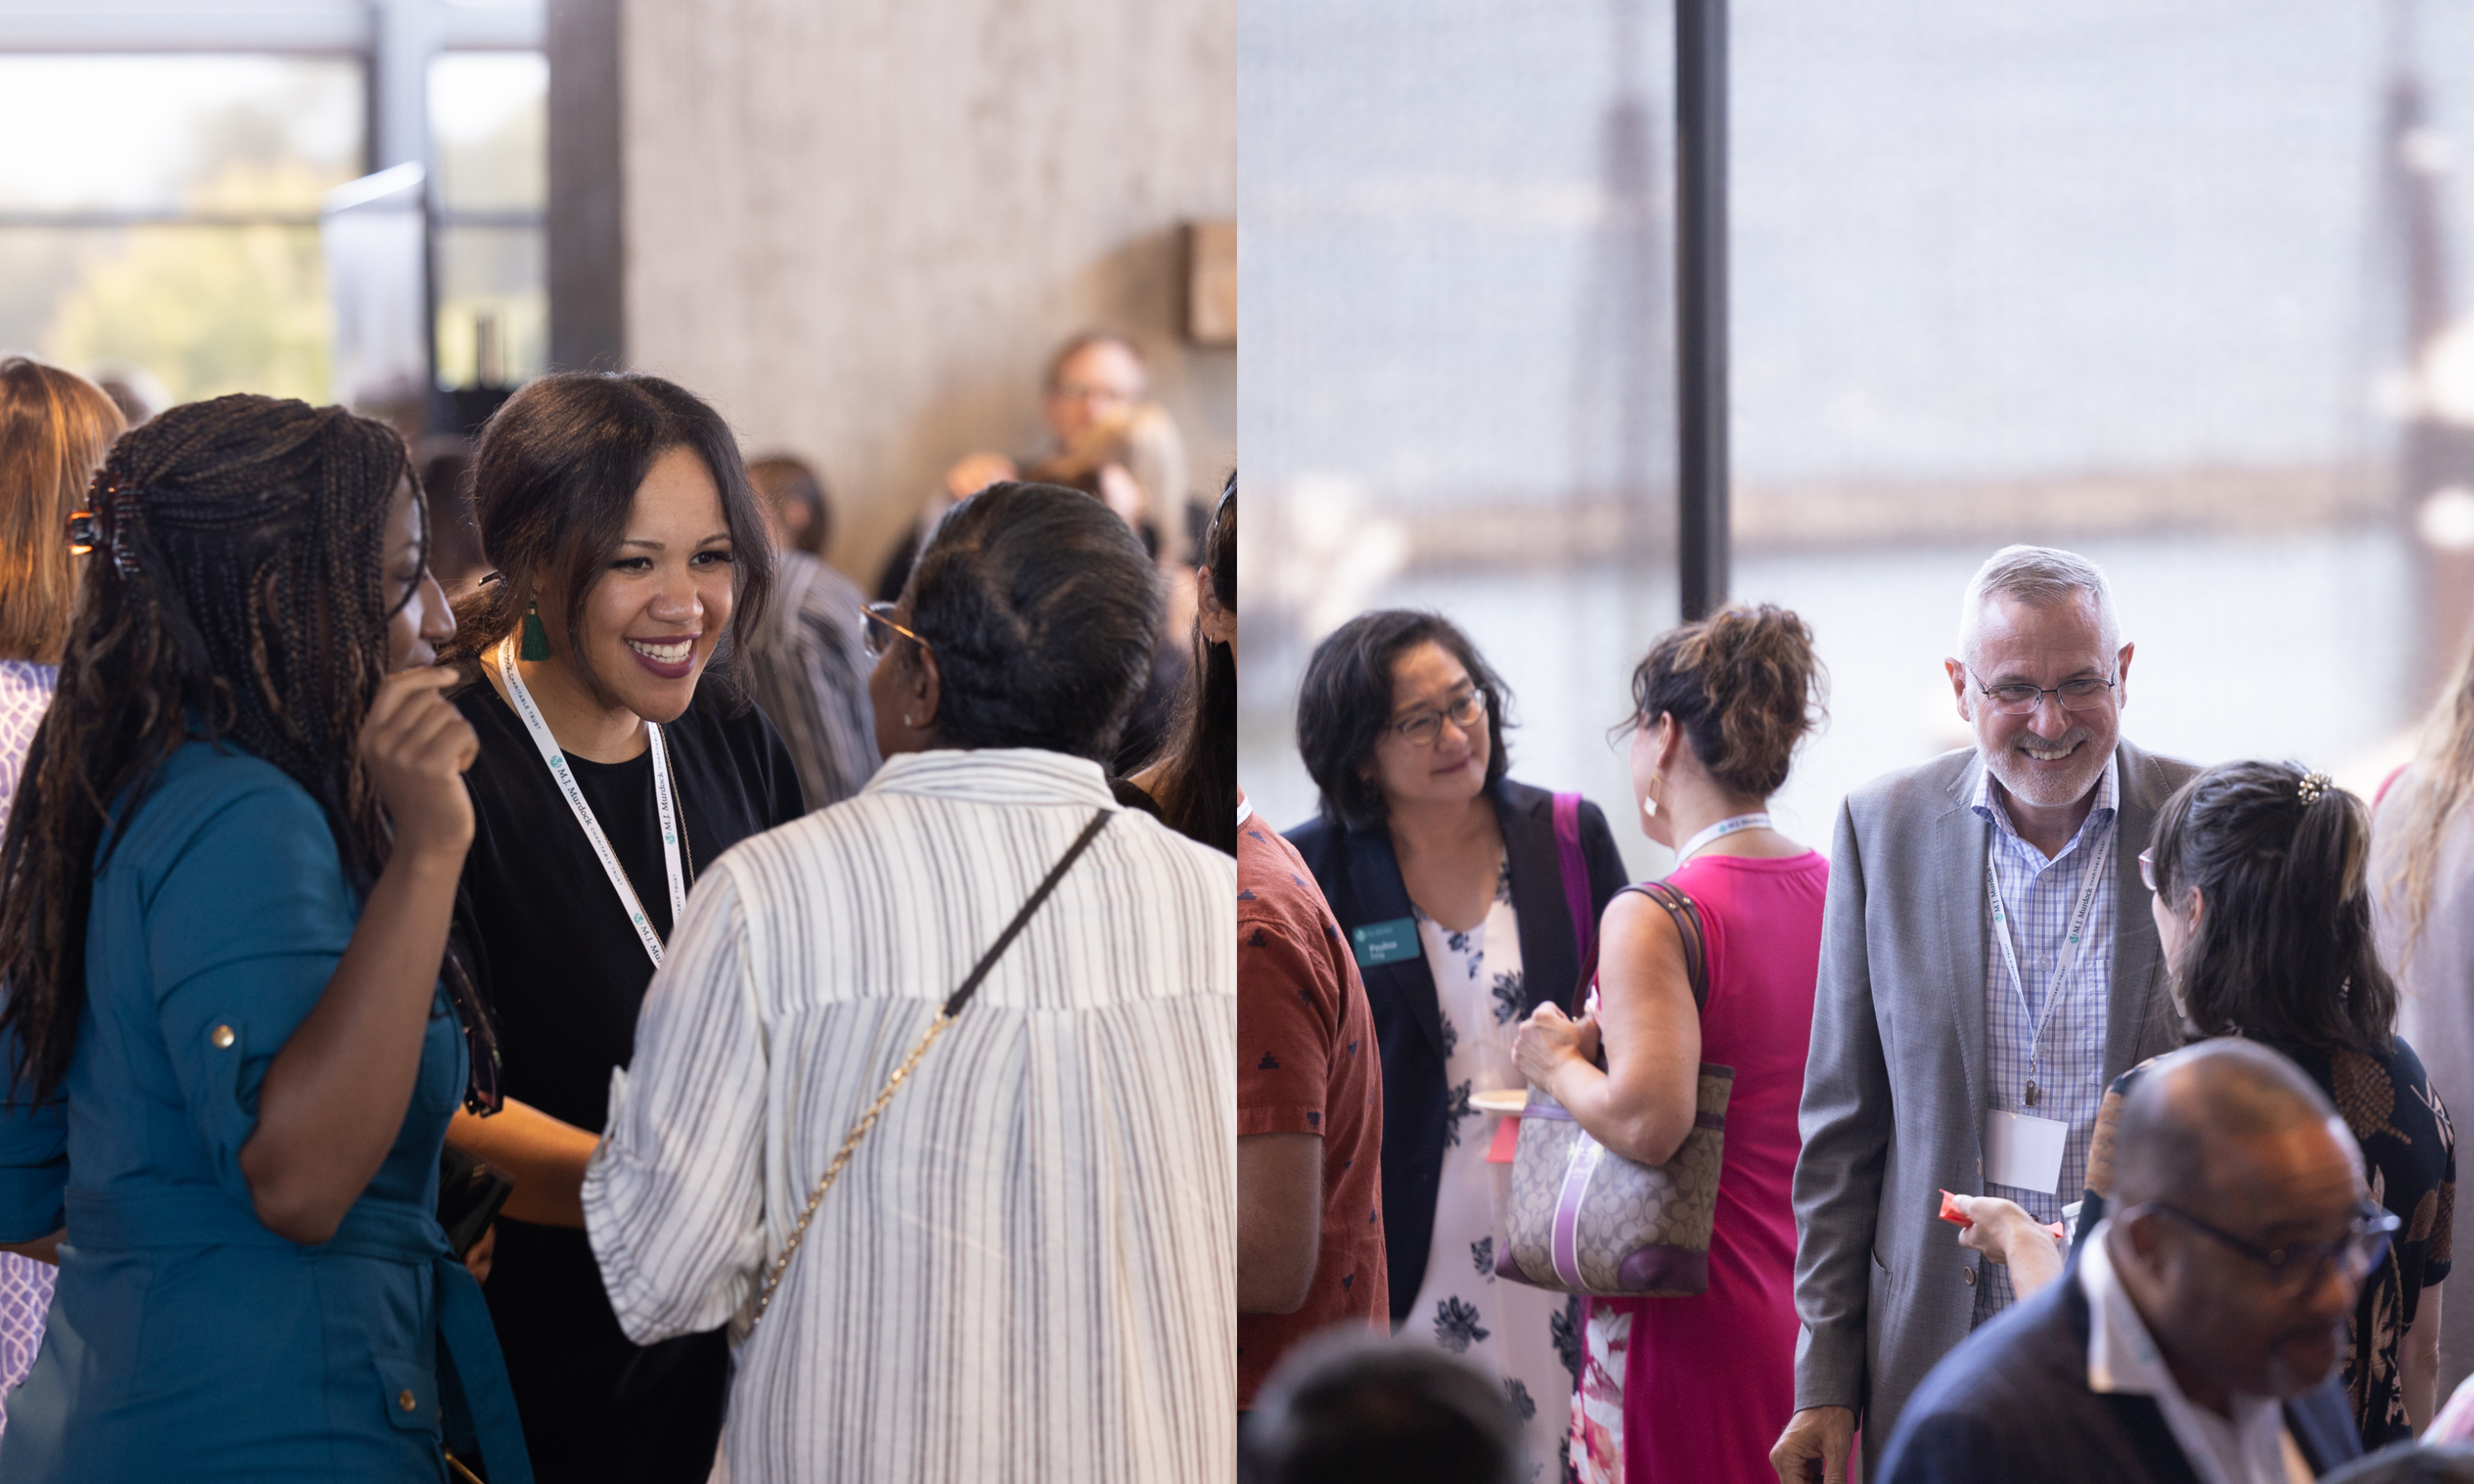 A collage of two photos; on the left, three women have a conversation at the Founder's Day event; on the right, a man smiles at a woman in conversation with two people in the background